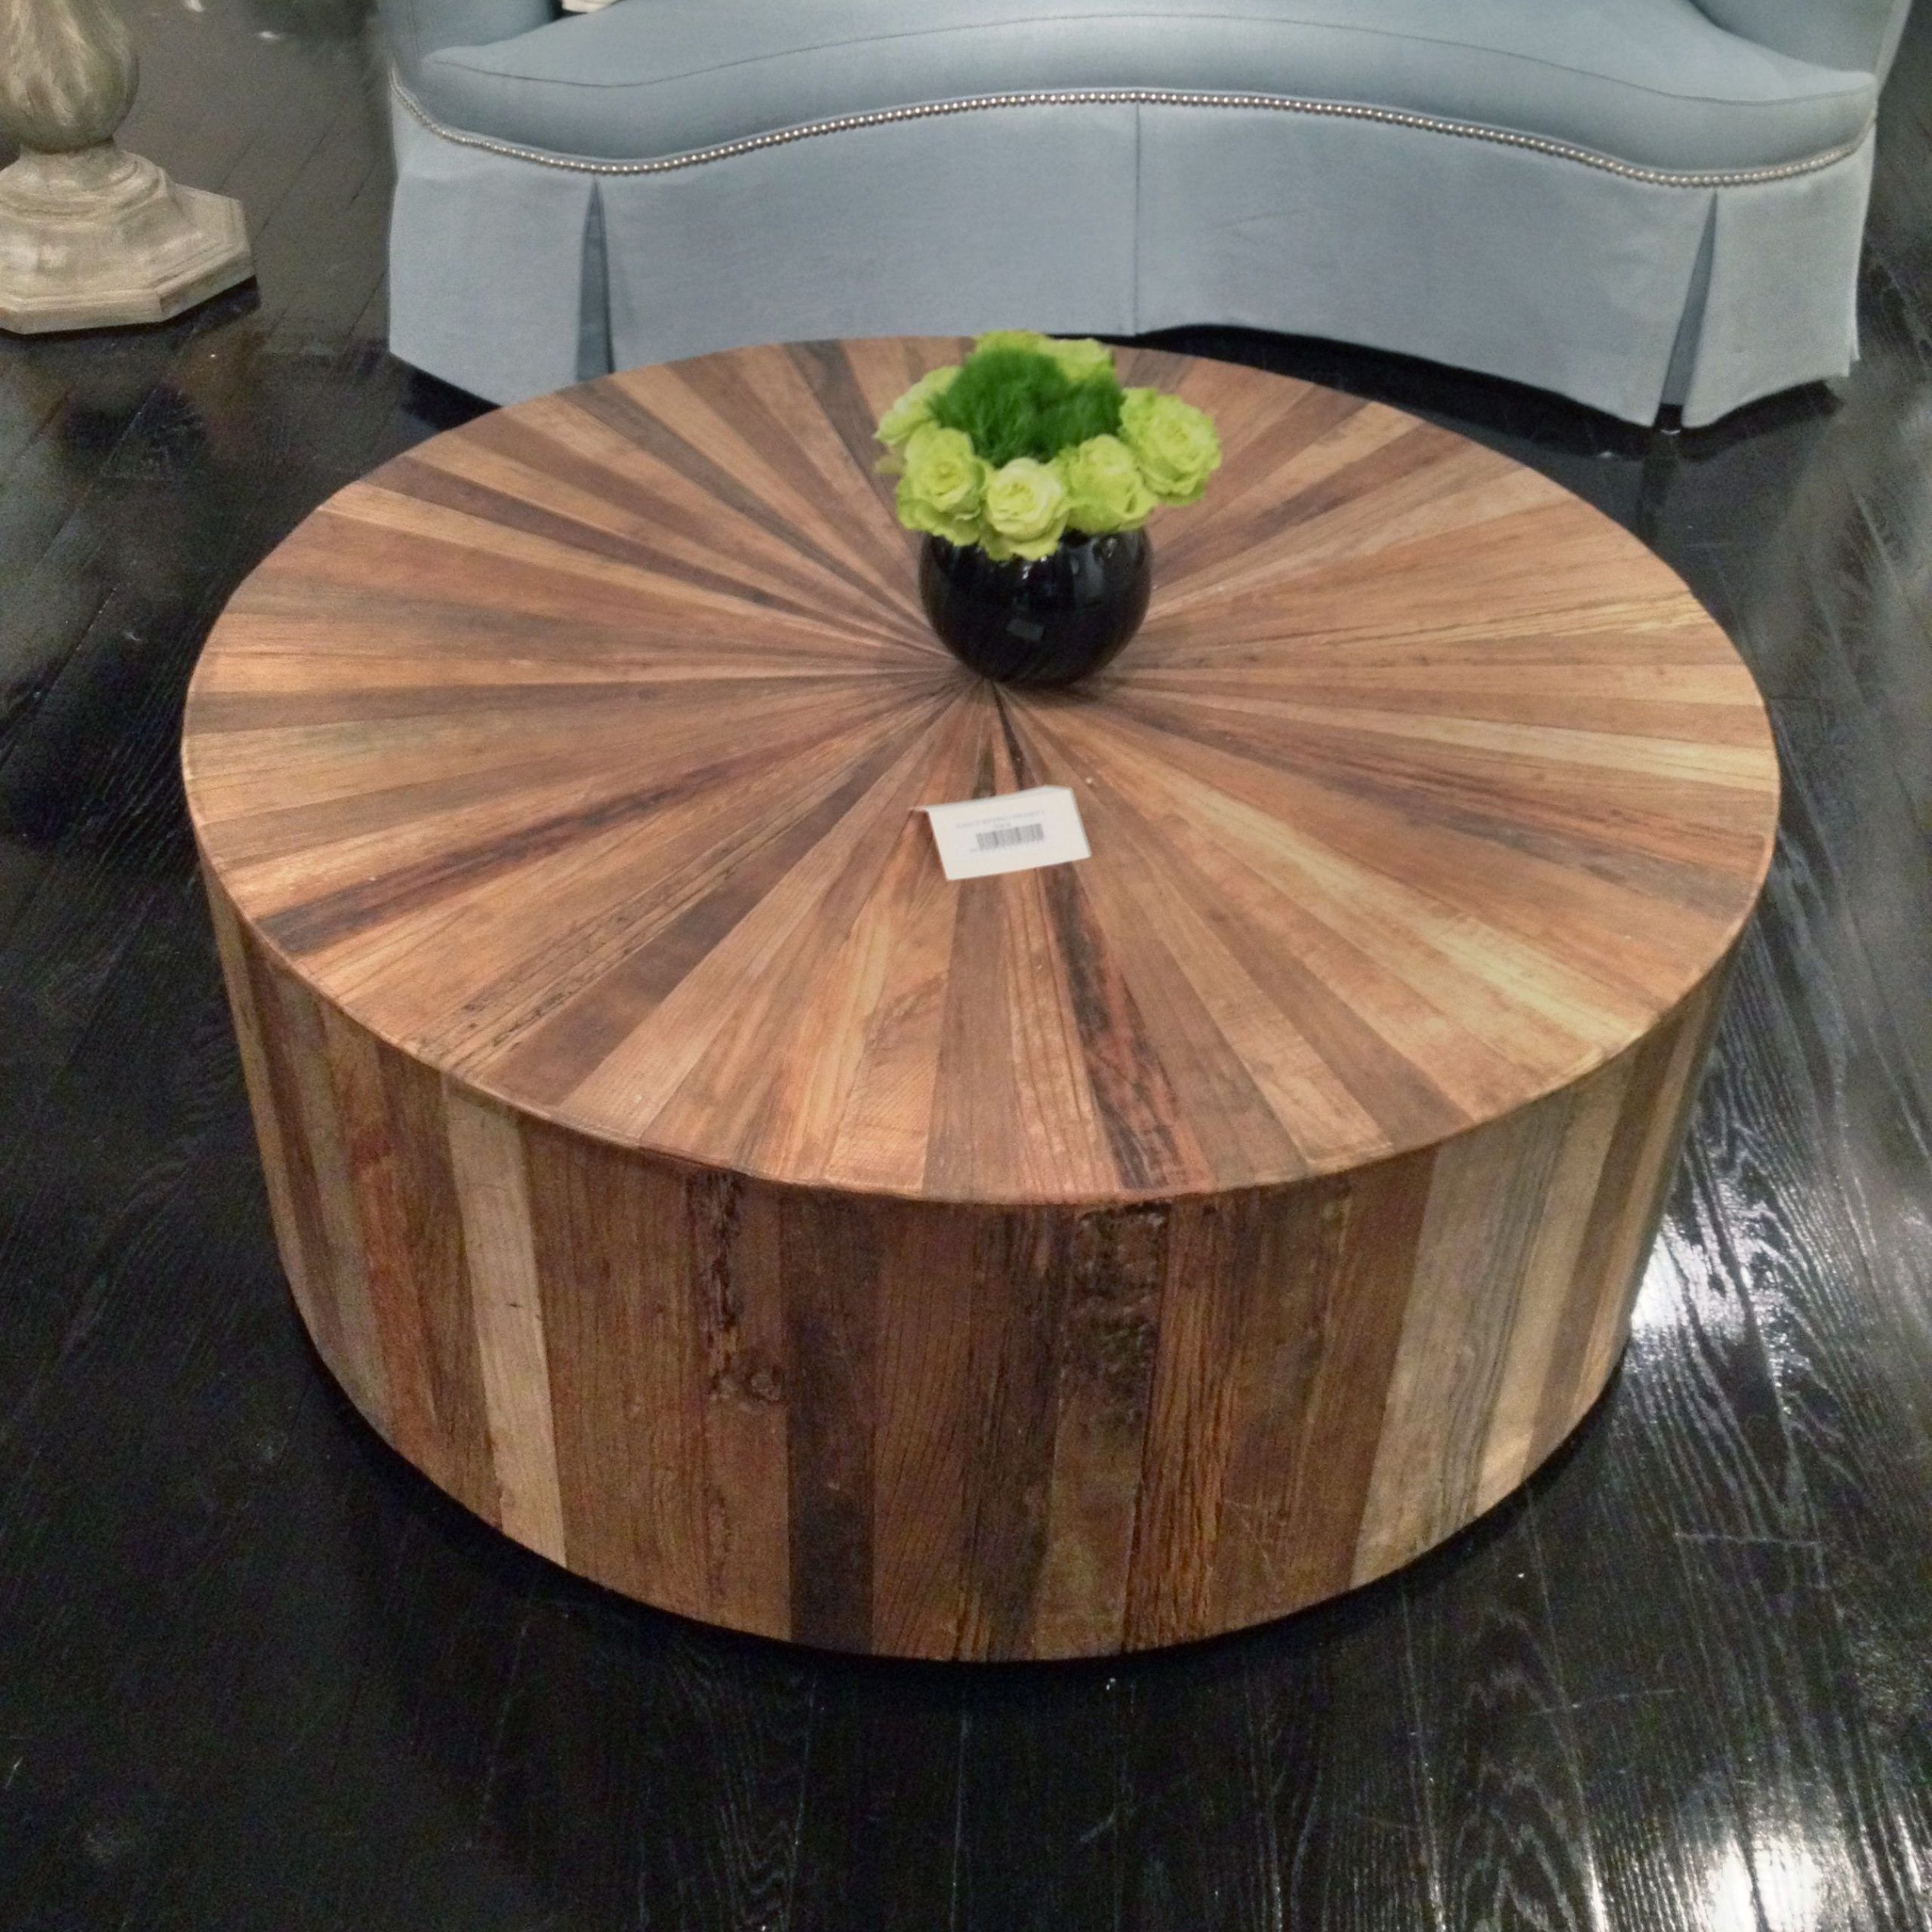 Round Wood Coffee Tables With Storage : Yj Round Storage Coffee Table With Regard To Latest Round Coffee Tables (View 10 of 15)